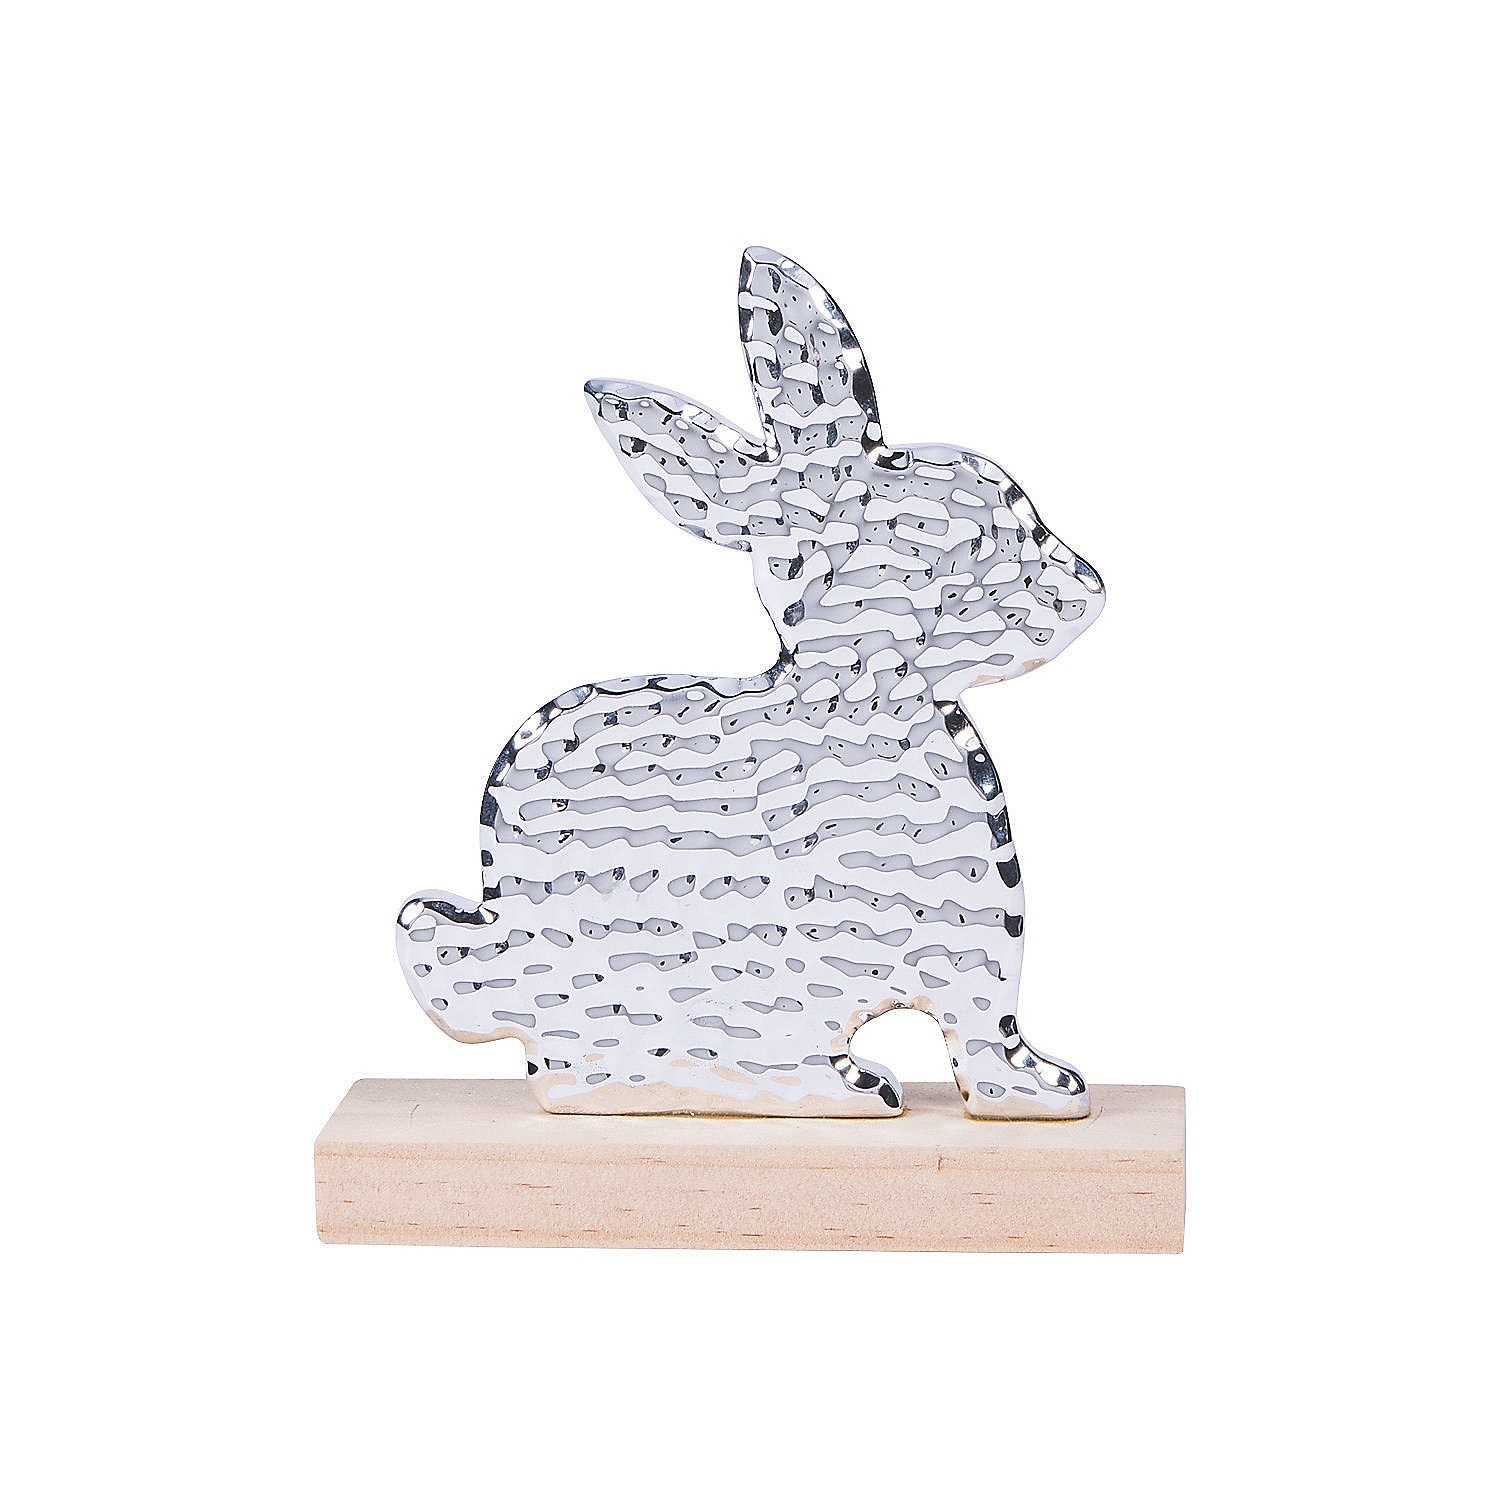 Zingz & Thingz 7 in. x 6 in. x 10 in. Mom and Baby Rabbit Figurine